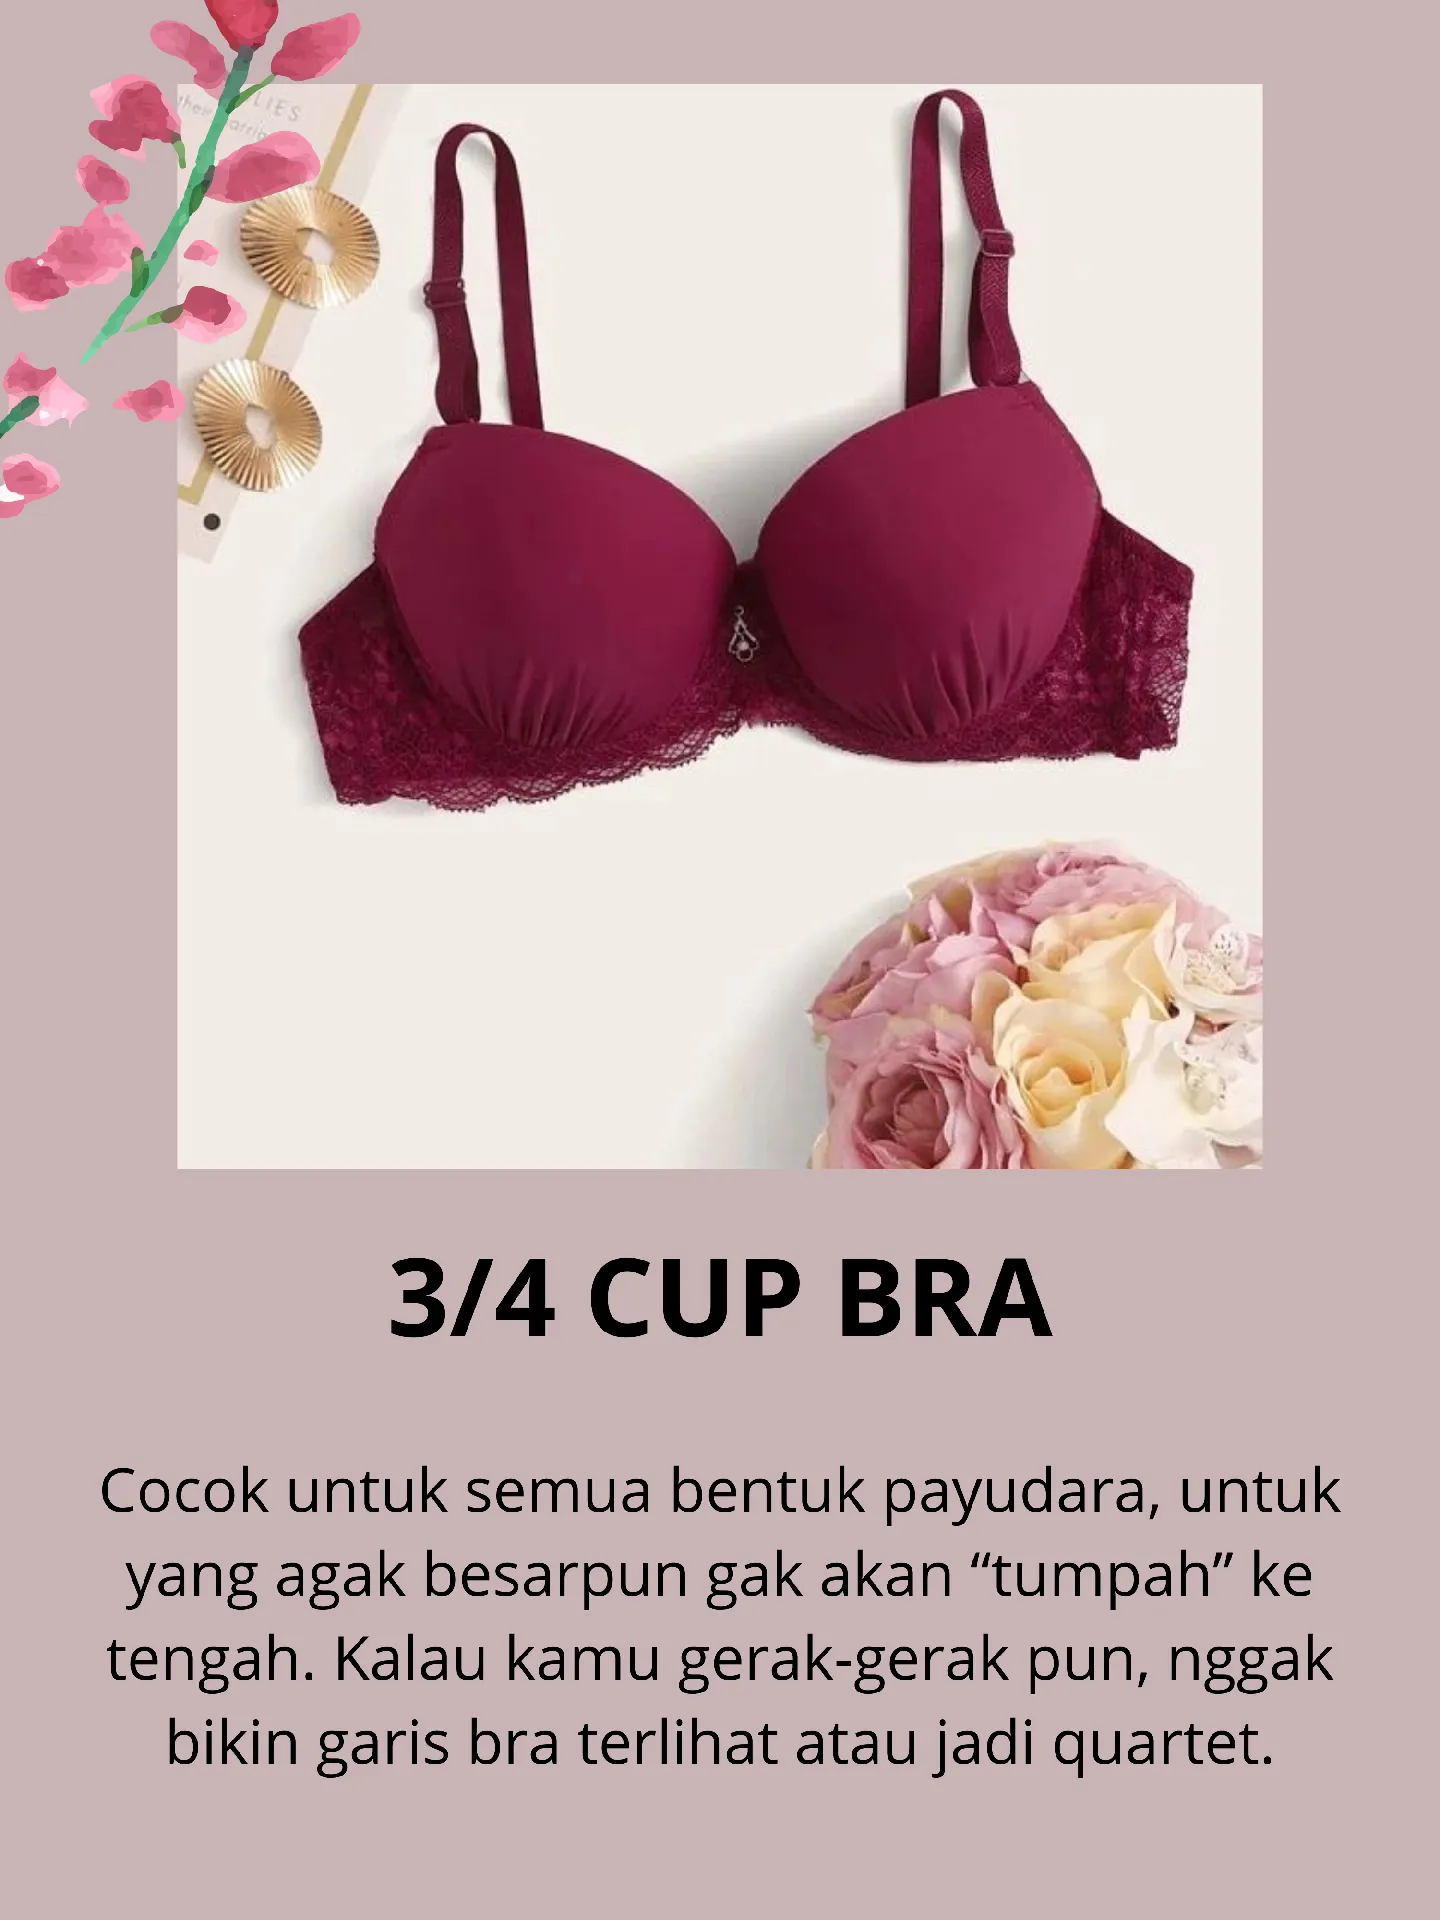 LOOKING FOR COMFY BRAS? READ THIS!